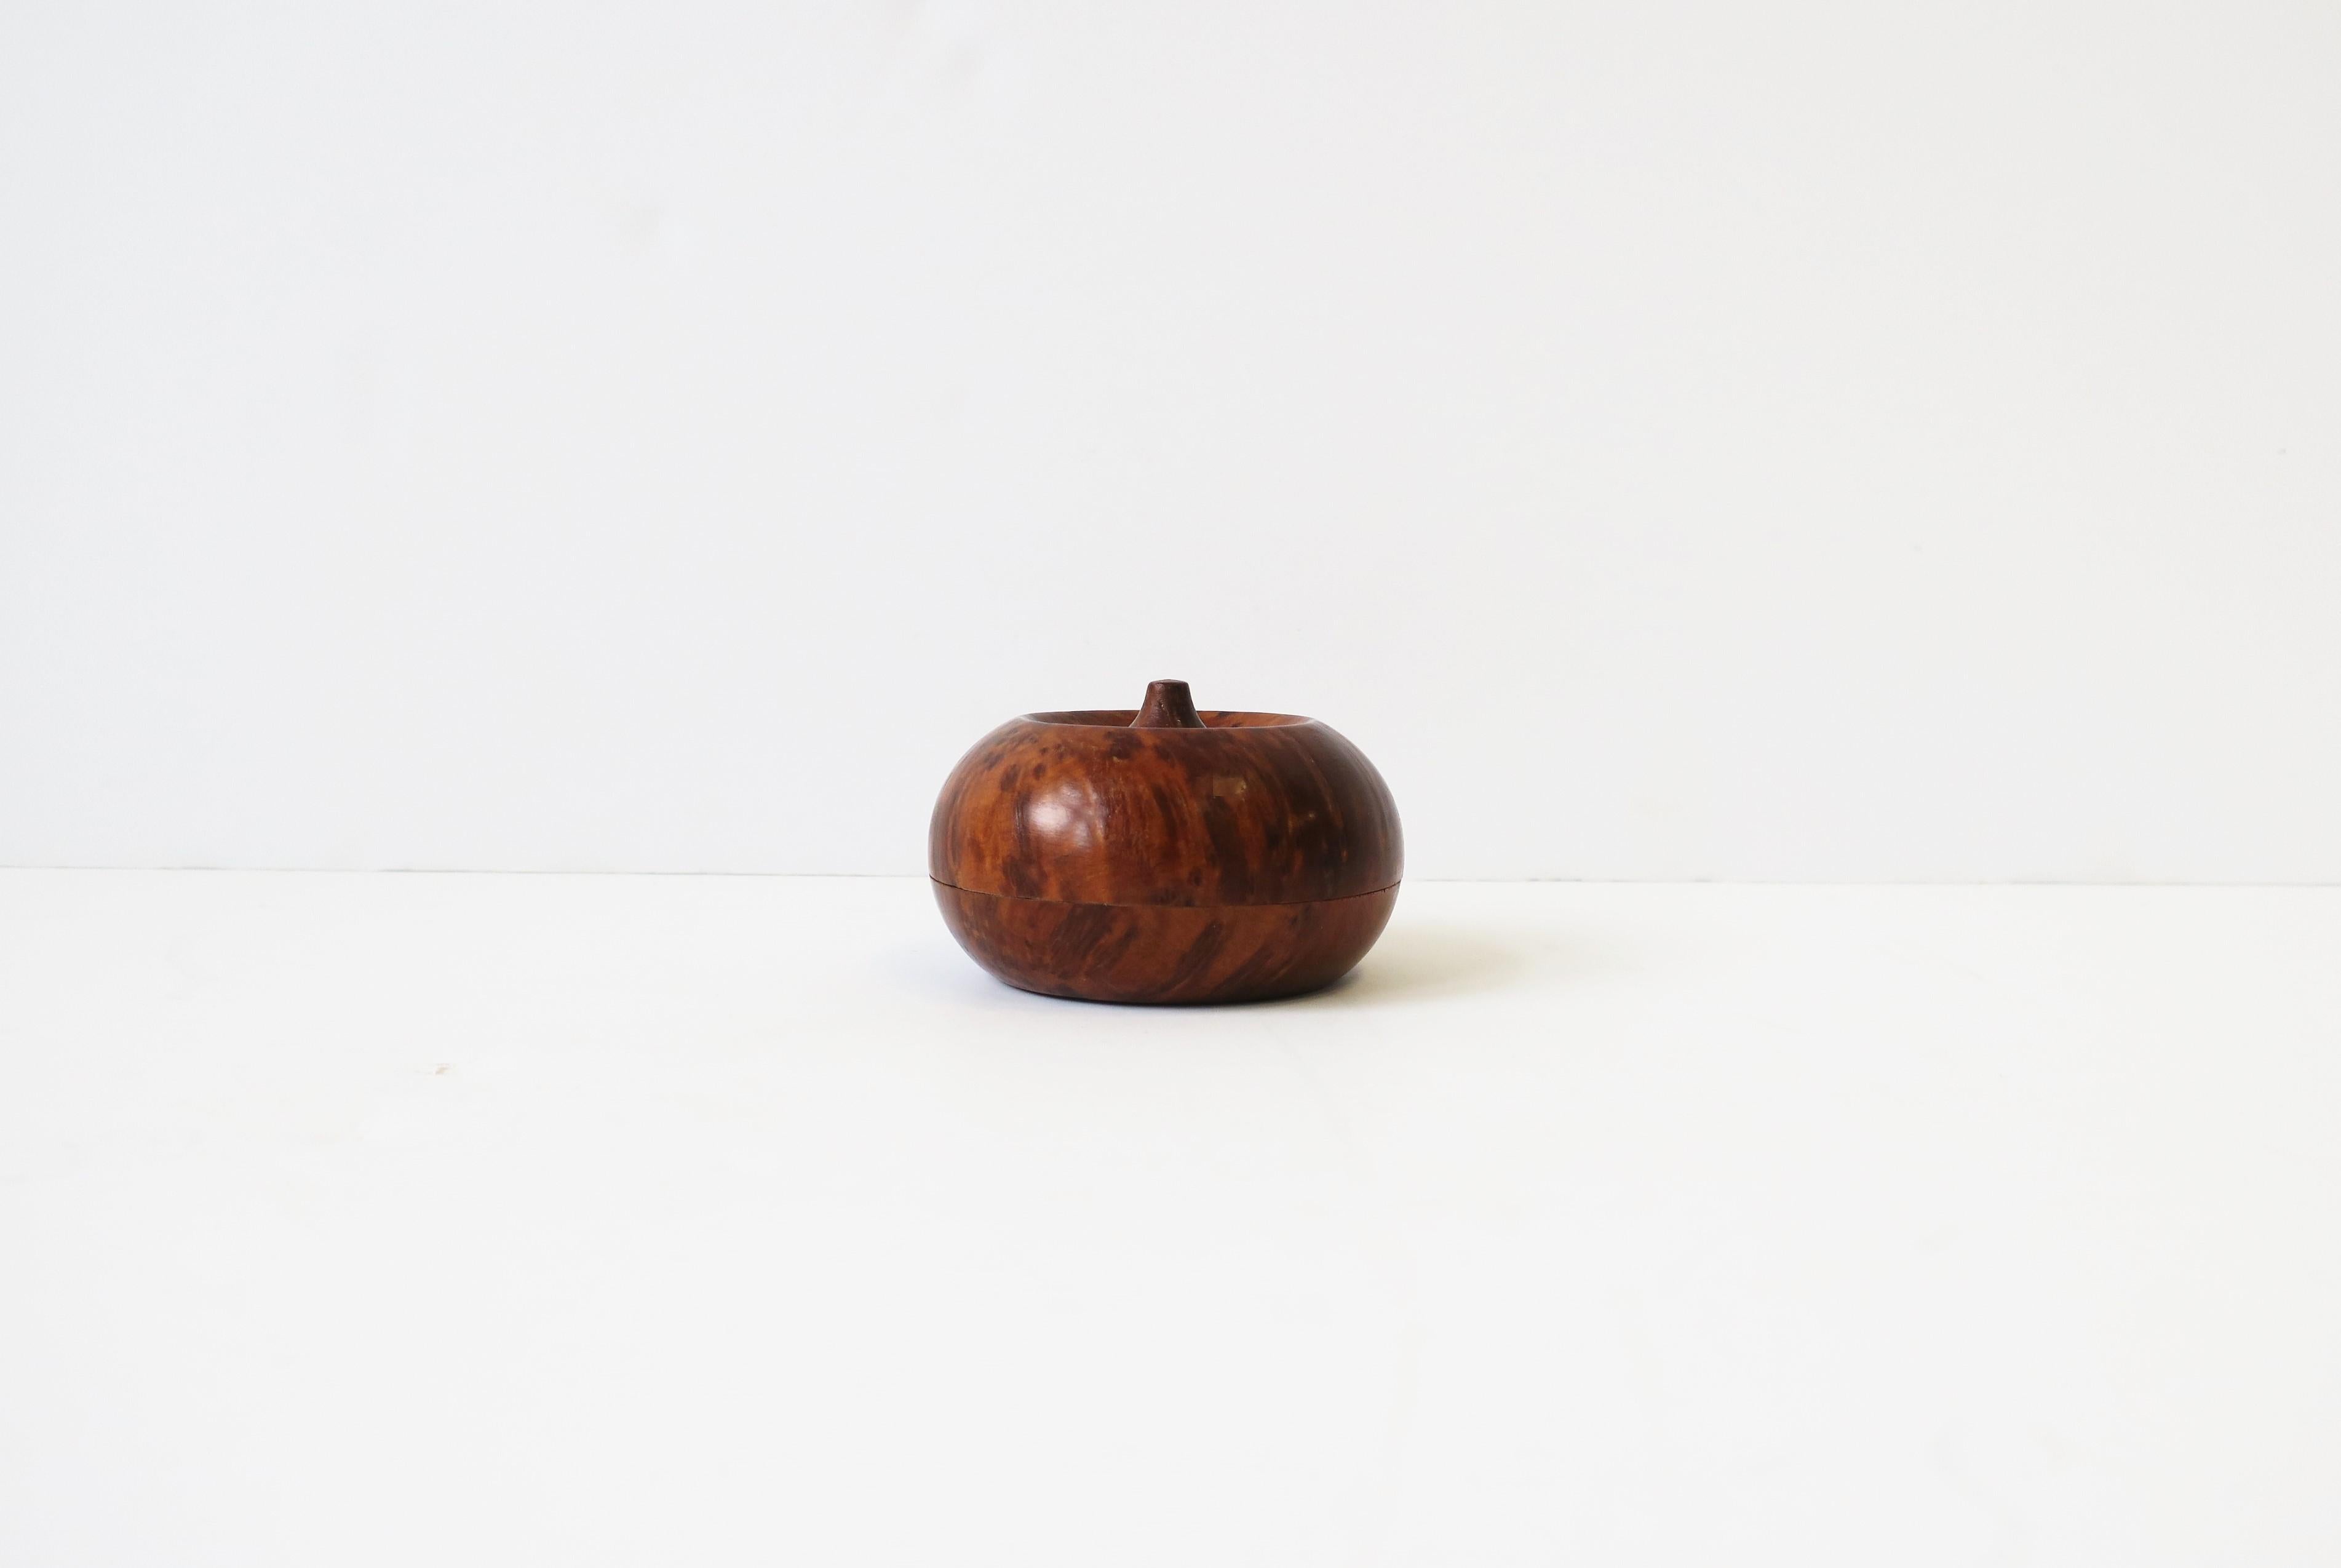 A small burl wood round box with lid, circa late 20th century. A great piece to hold small jewelry (as demonstrated) or other small items on a vanity, desk, nightstand table, dresser, etc. Dimensions: 2.75